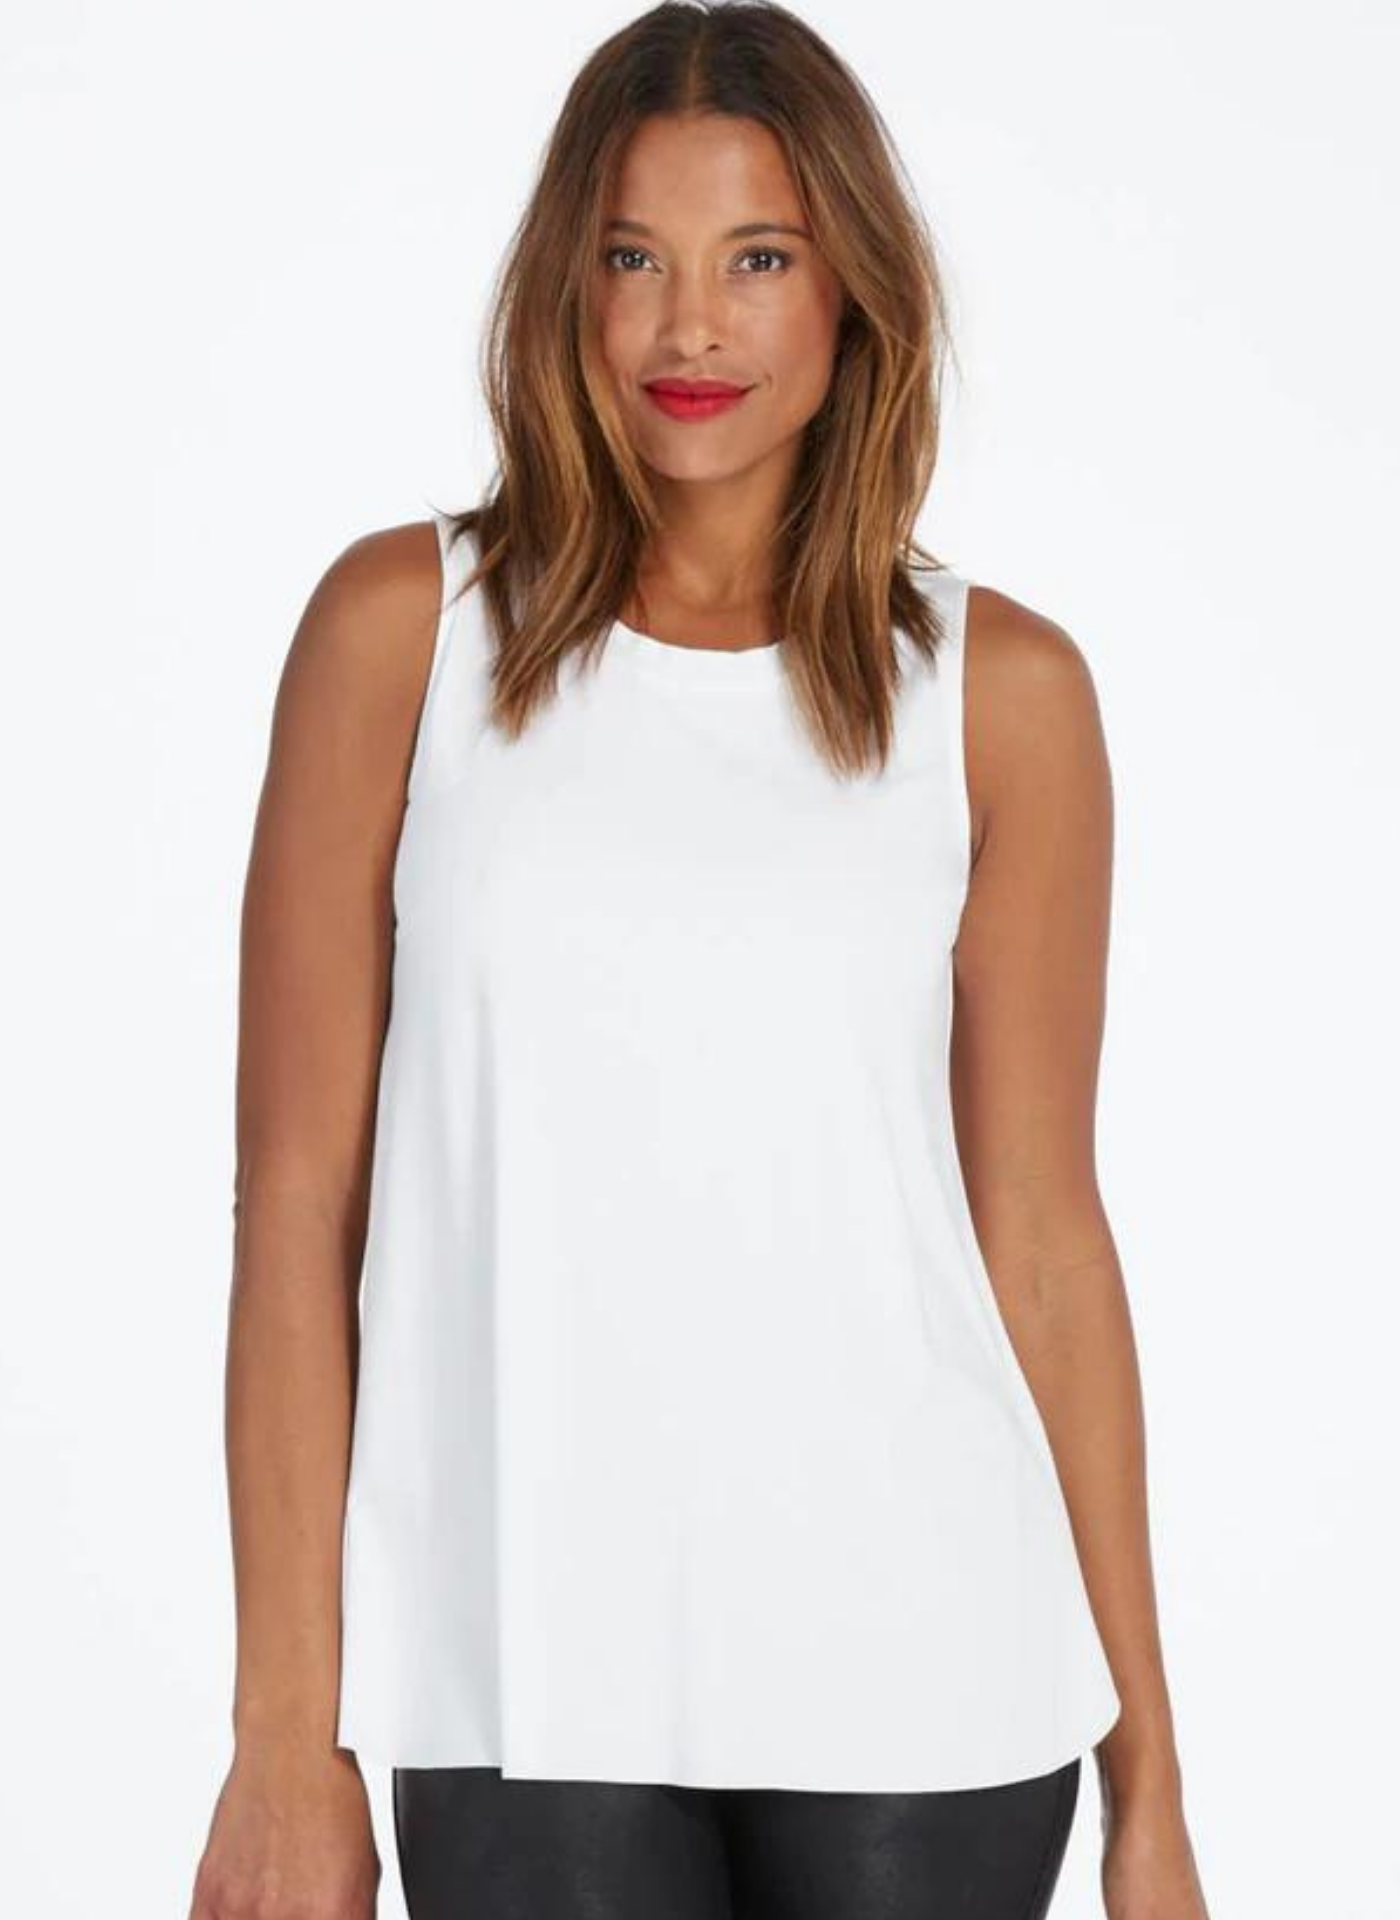 Assets by Spanx Women's Smoothing Tank Top - White XL